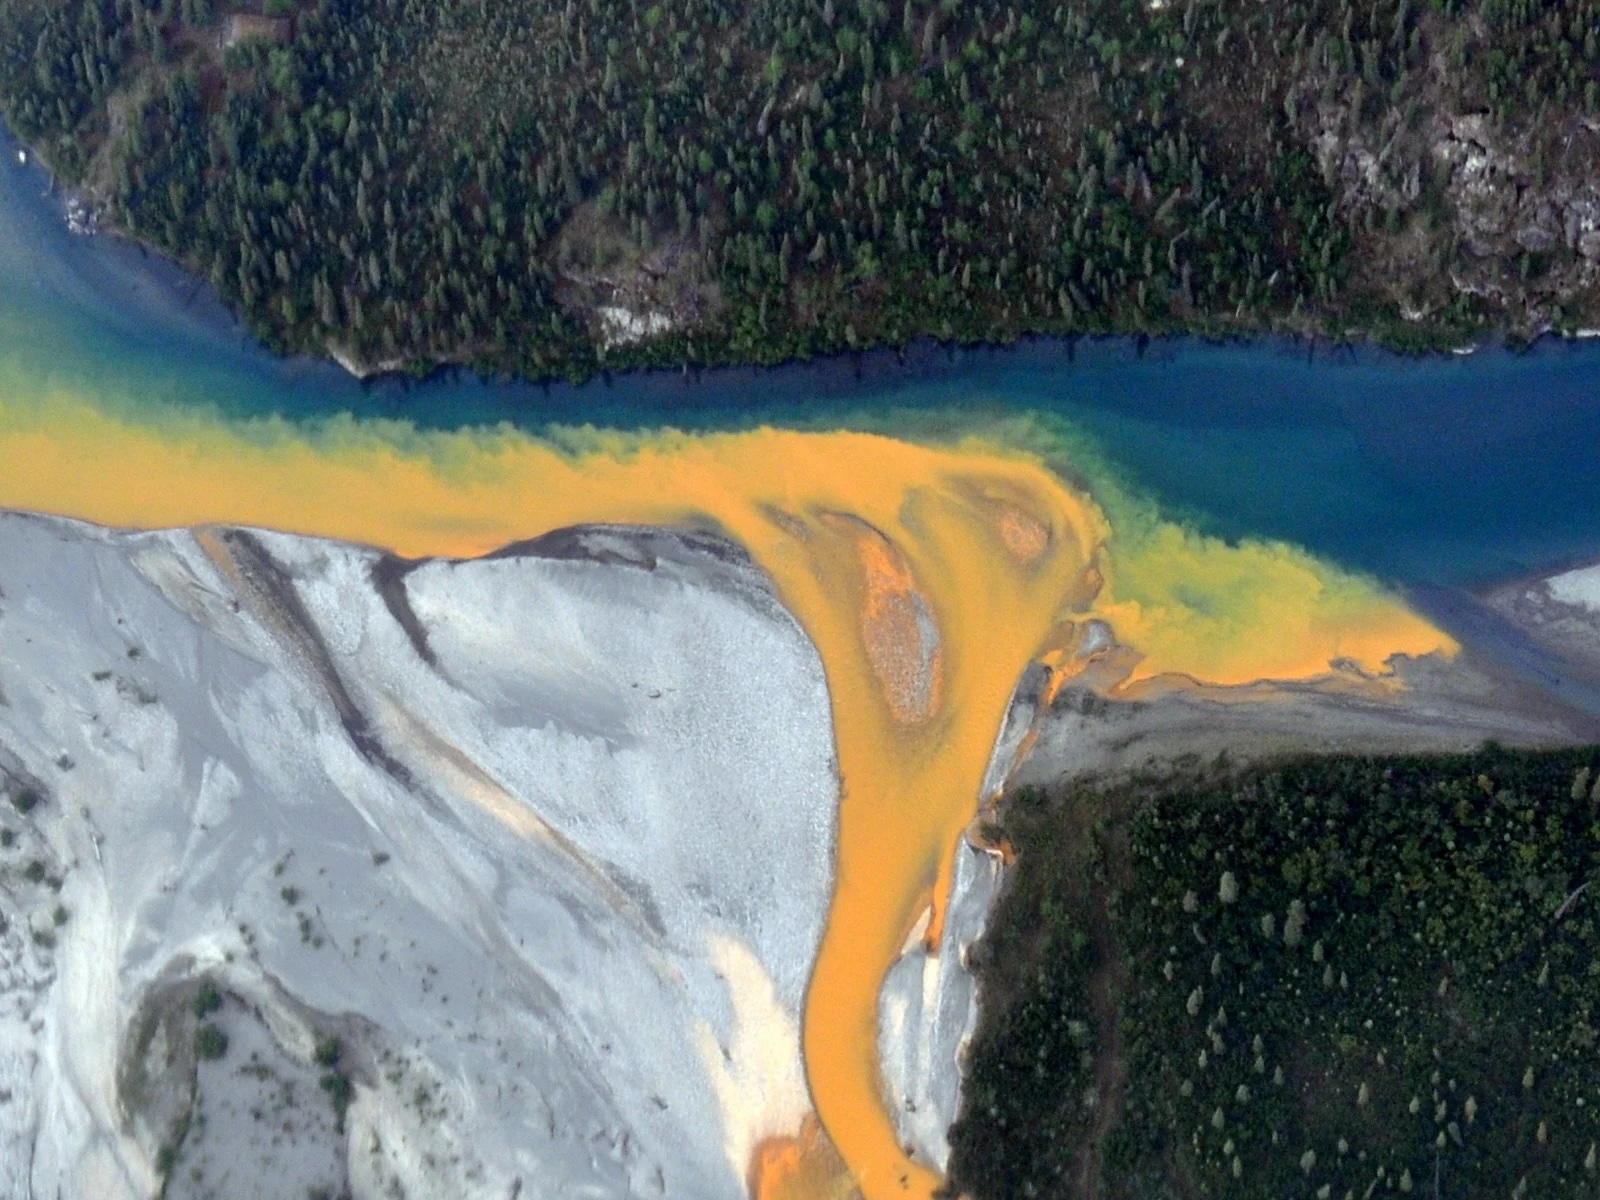 Rust colored river flows through forest in aerial view